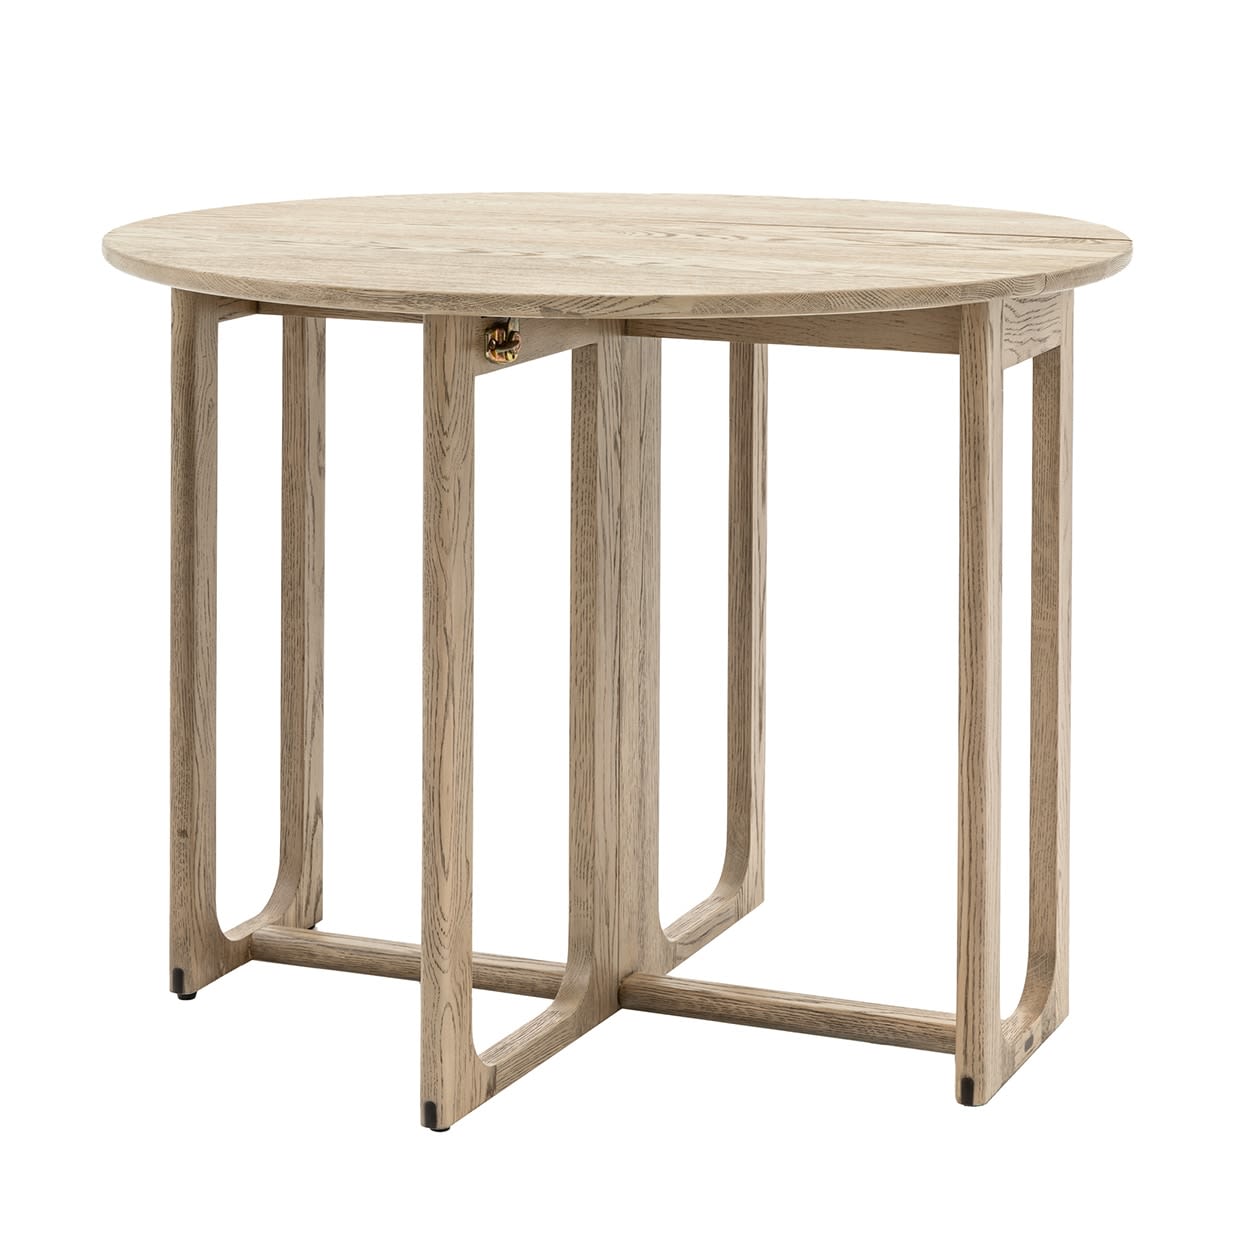 Craft Grey Wooden Round Folding Dining Table by Gallery Direct